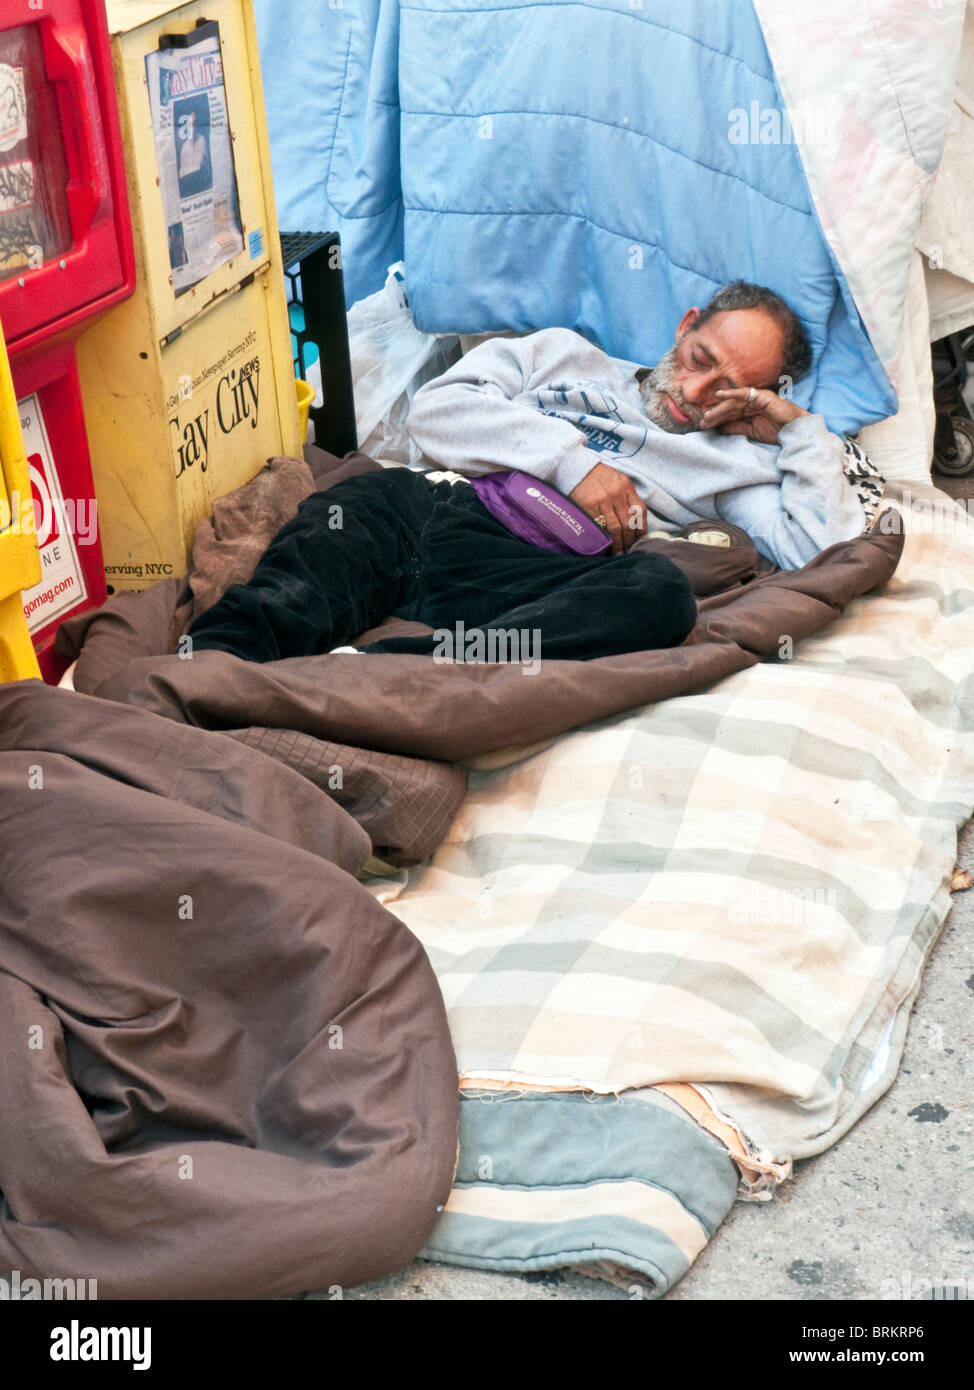 homeless Hispanic man with emaciated face wearing clean clothes lies peacefully asleep on clean bedding on New York sidewalk Stock Photo